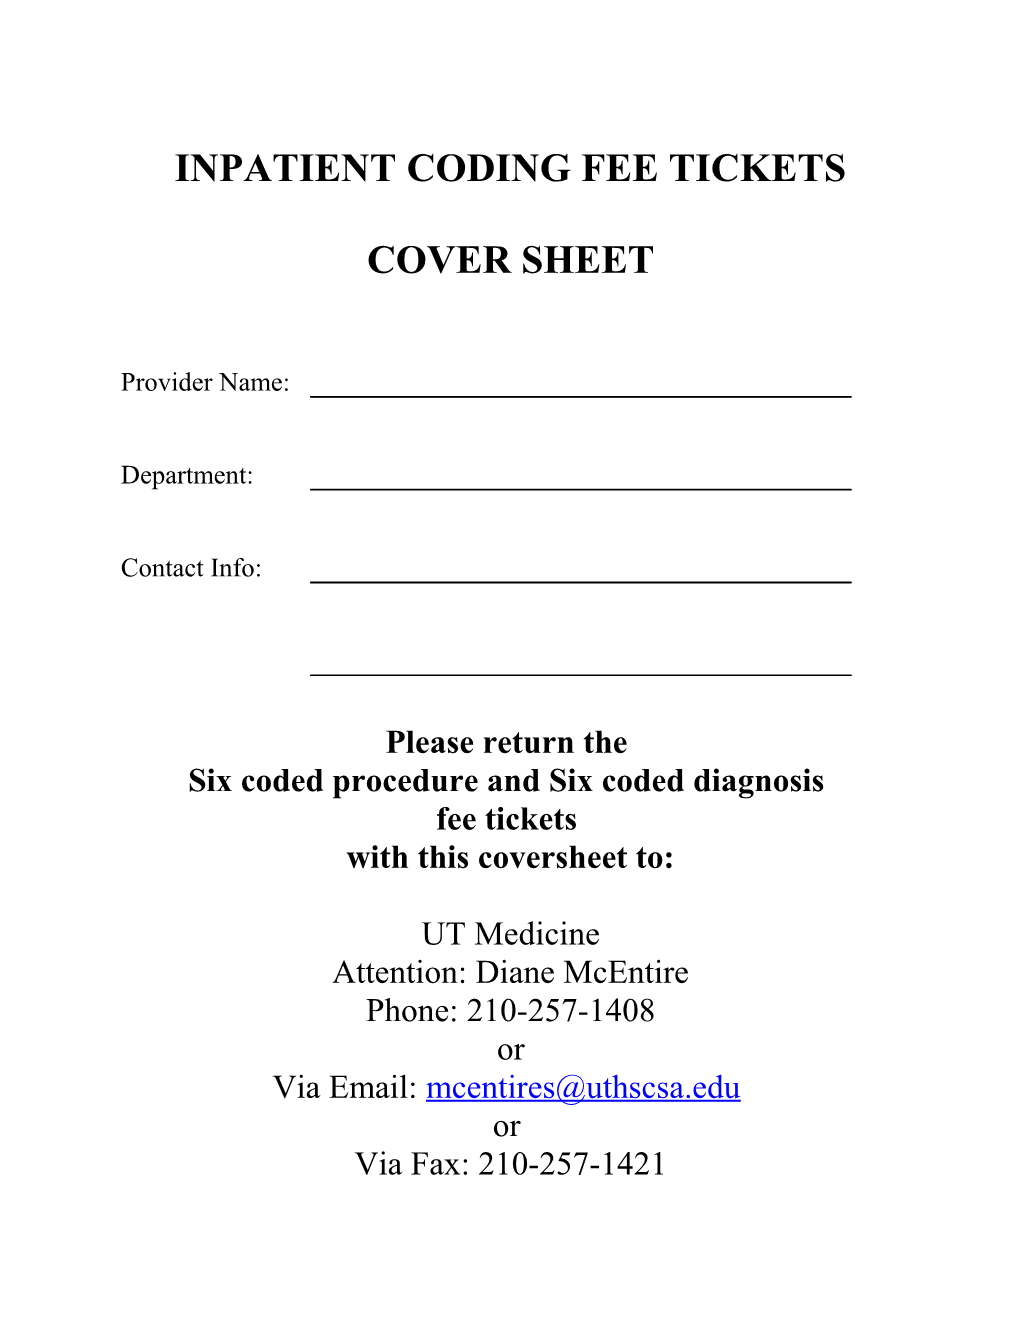 Inpatient Coding Fee Tickets